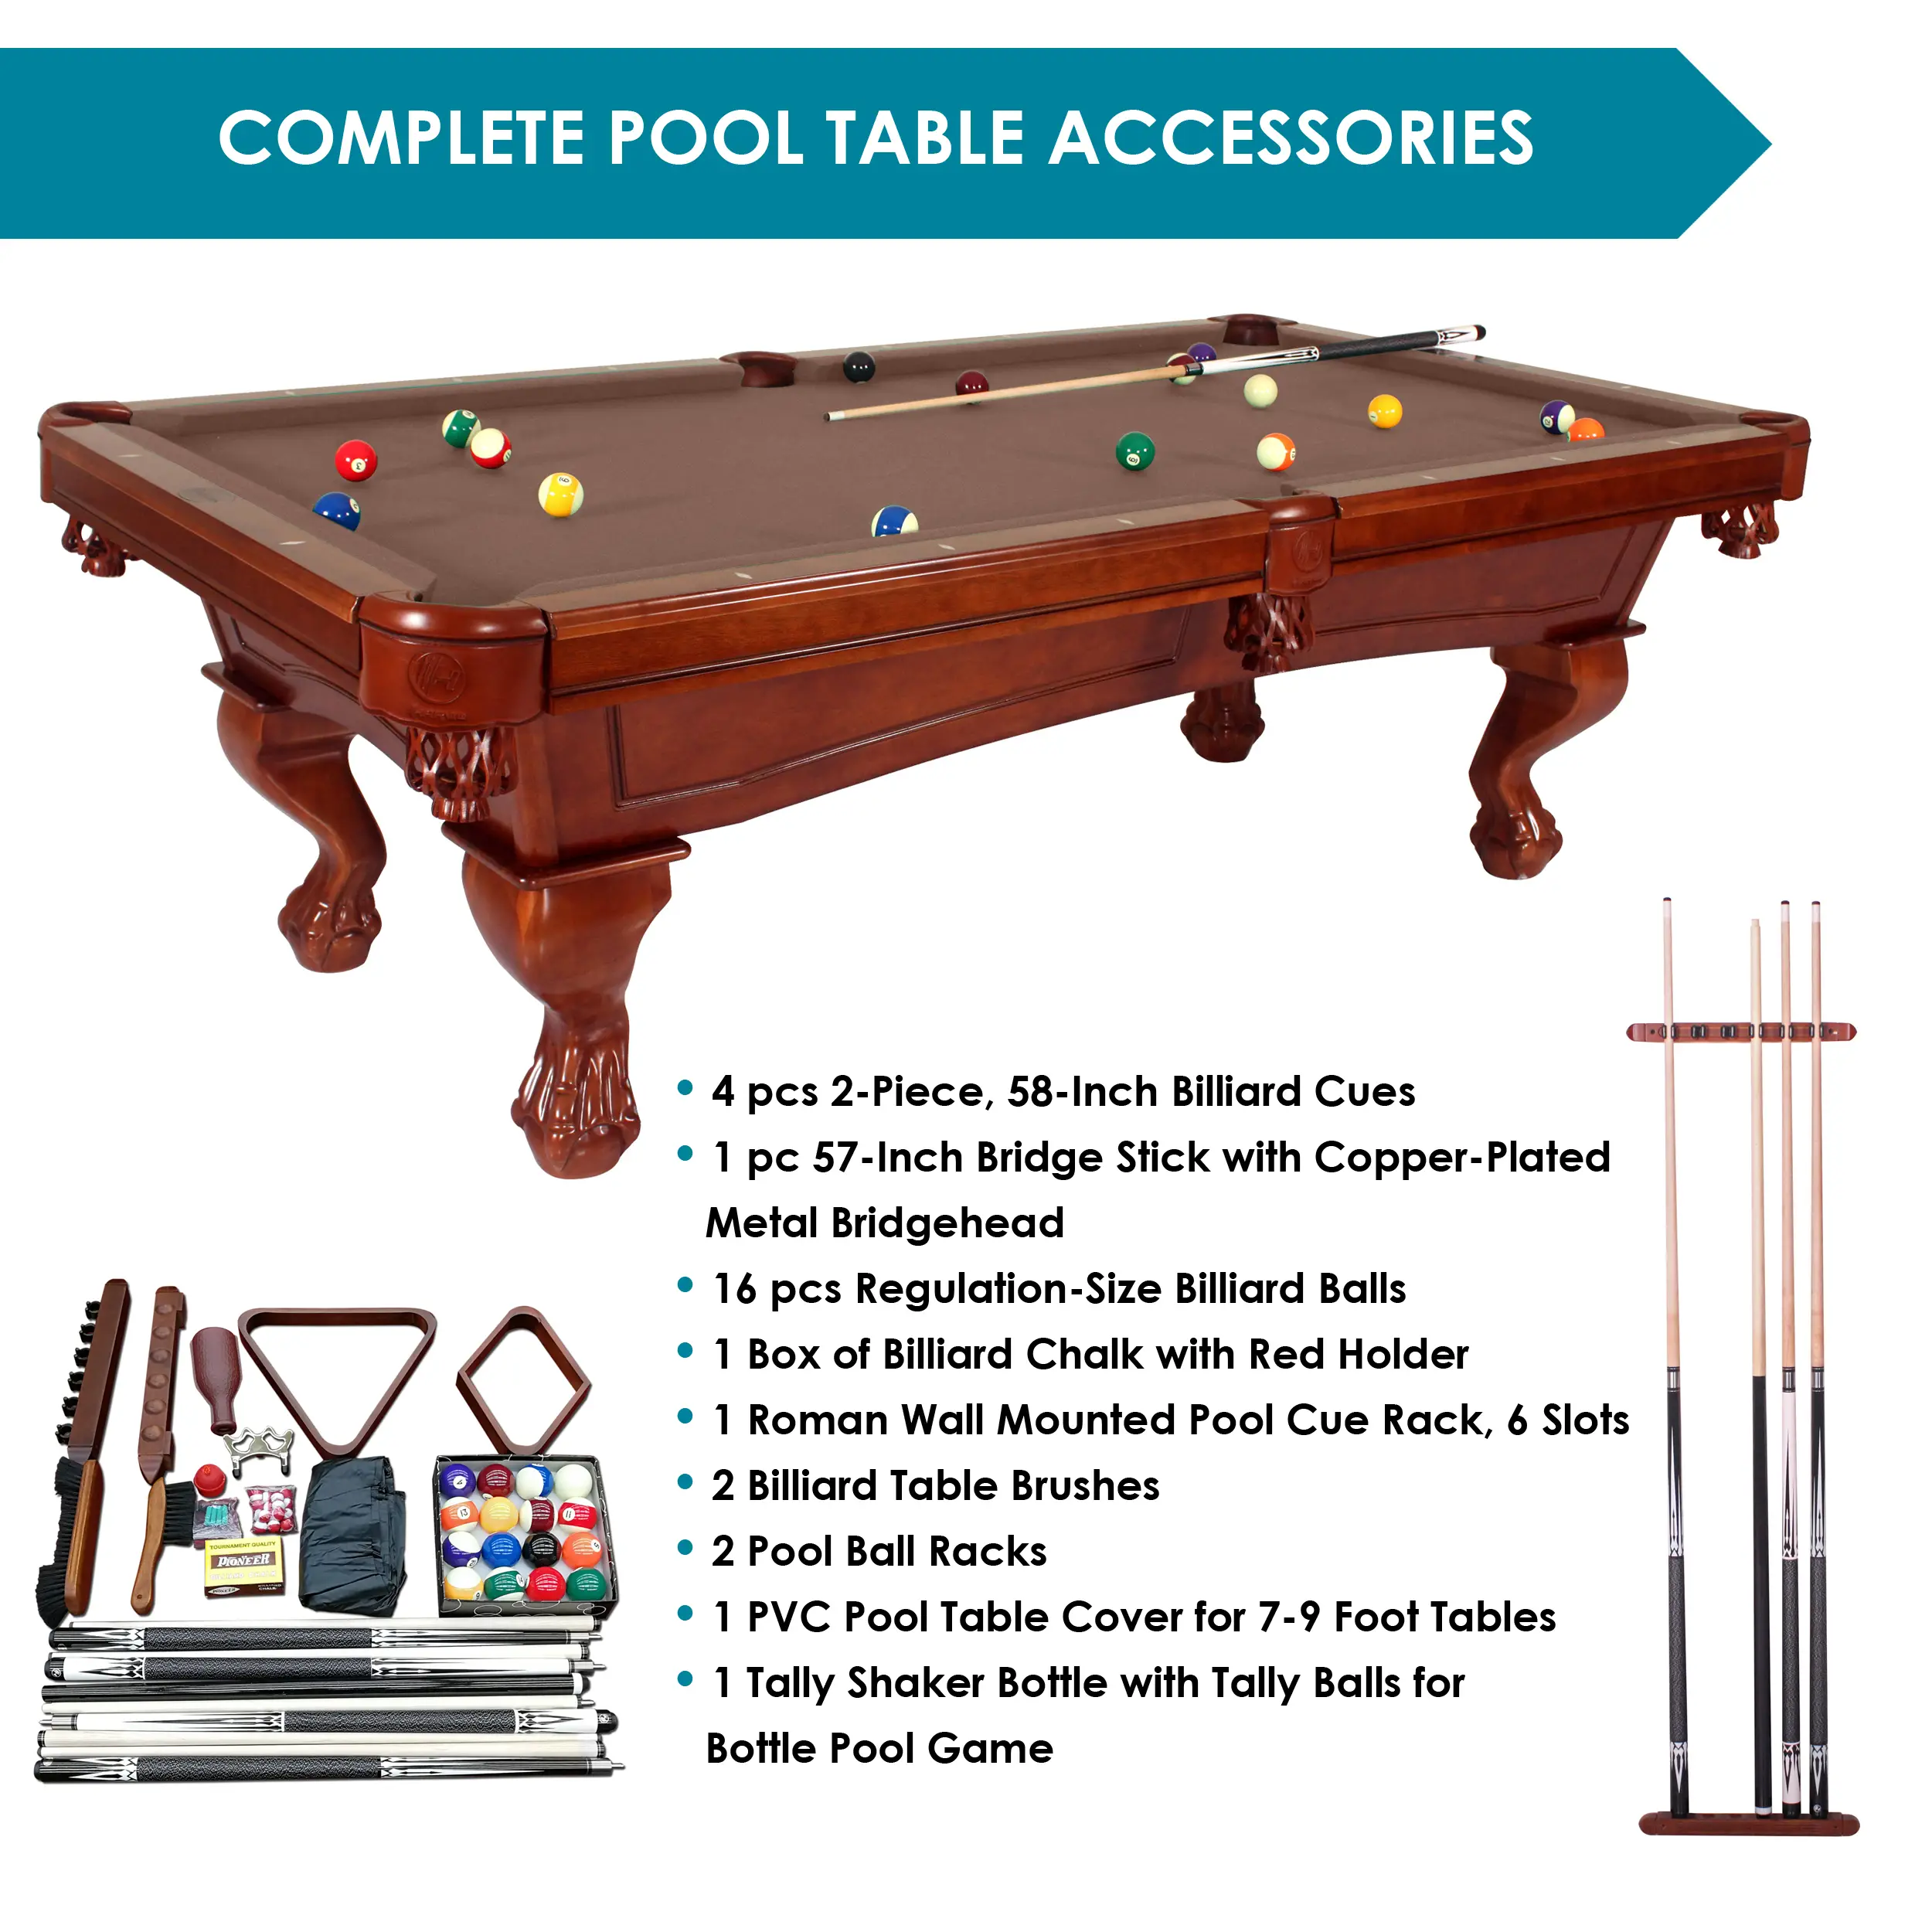 Latest Regulation: Regulation Pool Table Size Inches